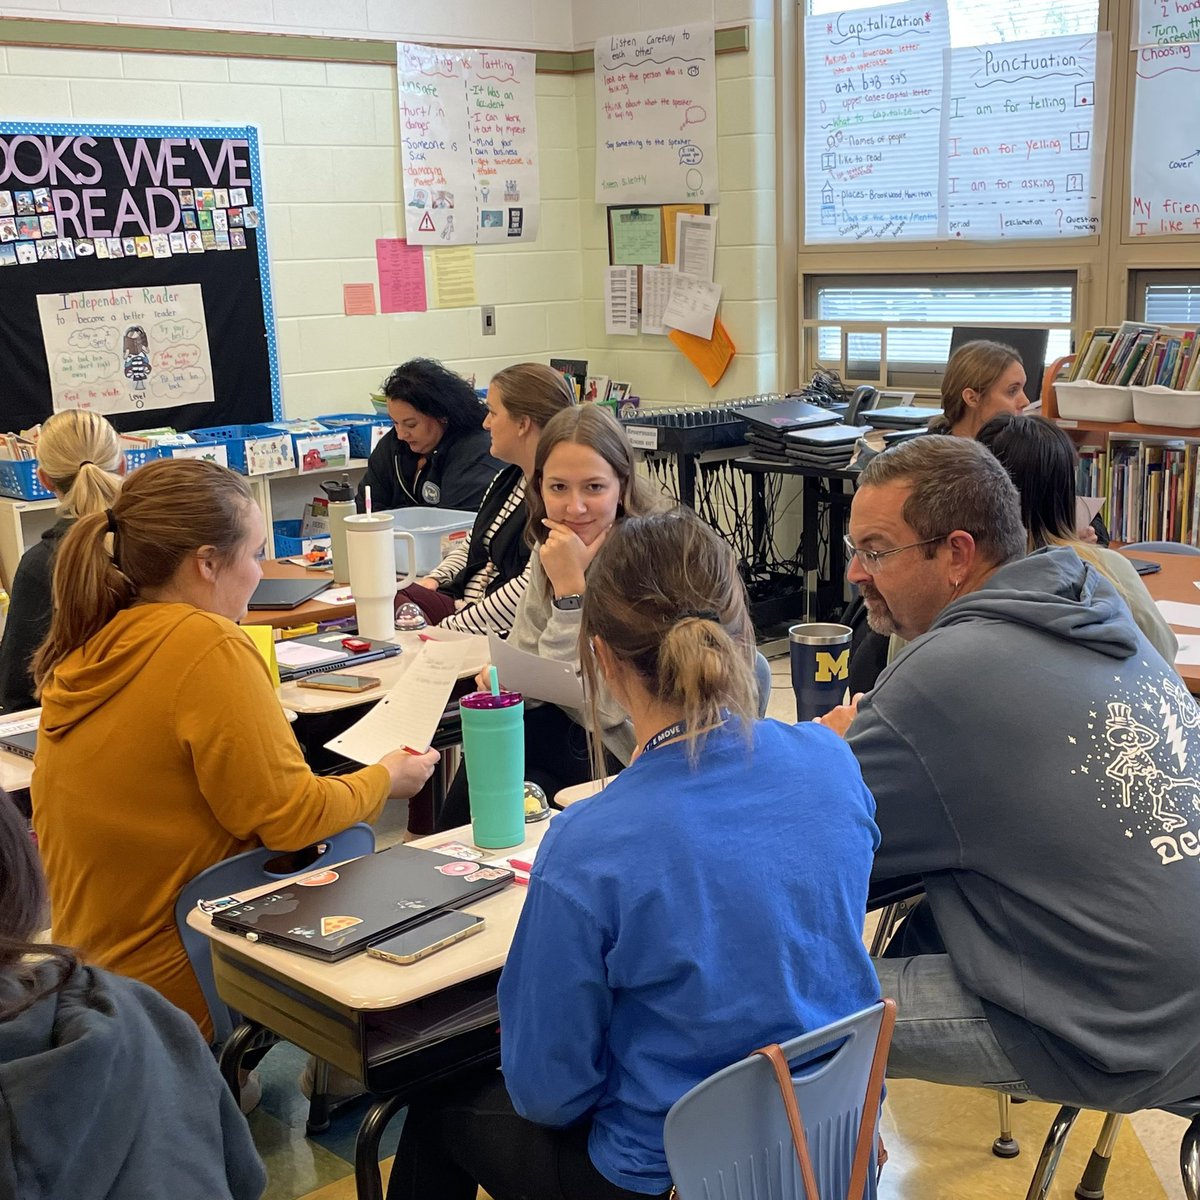 So much teamwork & collaboration today at Brookwood as we dig into the state report card & MAP data during our Data Walk, discuss ways to bring in spiral review in math, learn more about our Really Great Reading phonics program, & so much more! #AlwaysLearning #EveryMinuteCounts